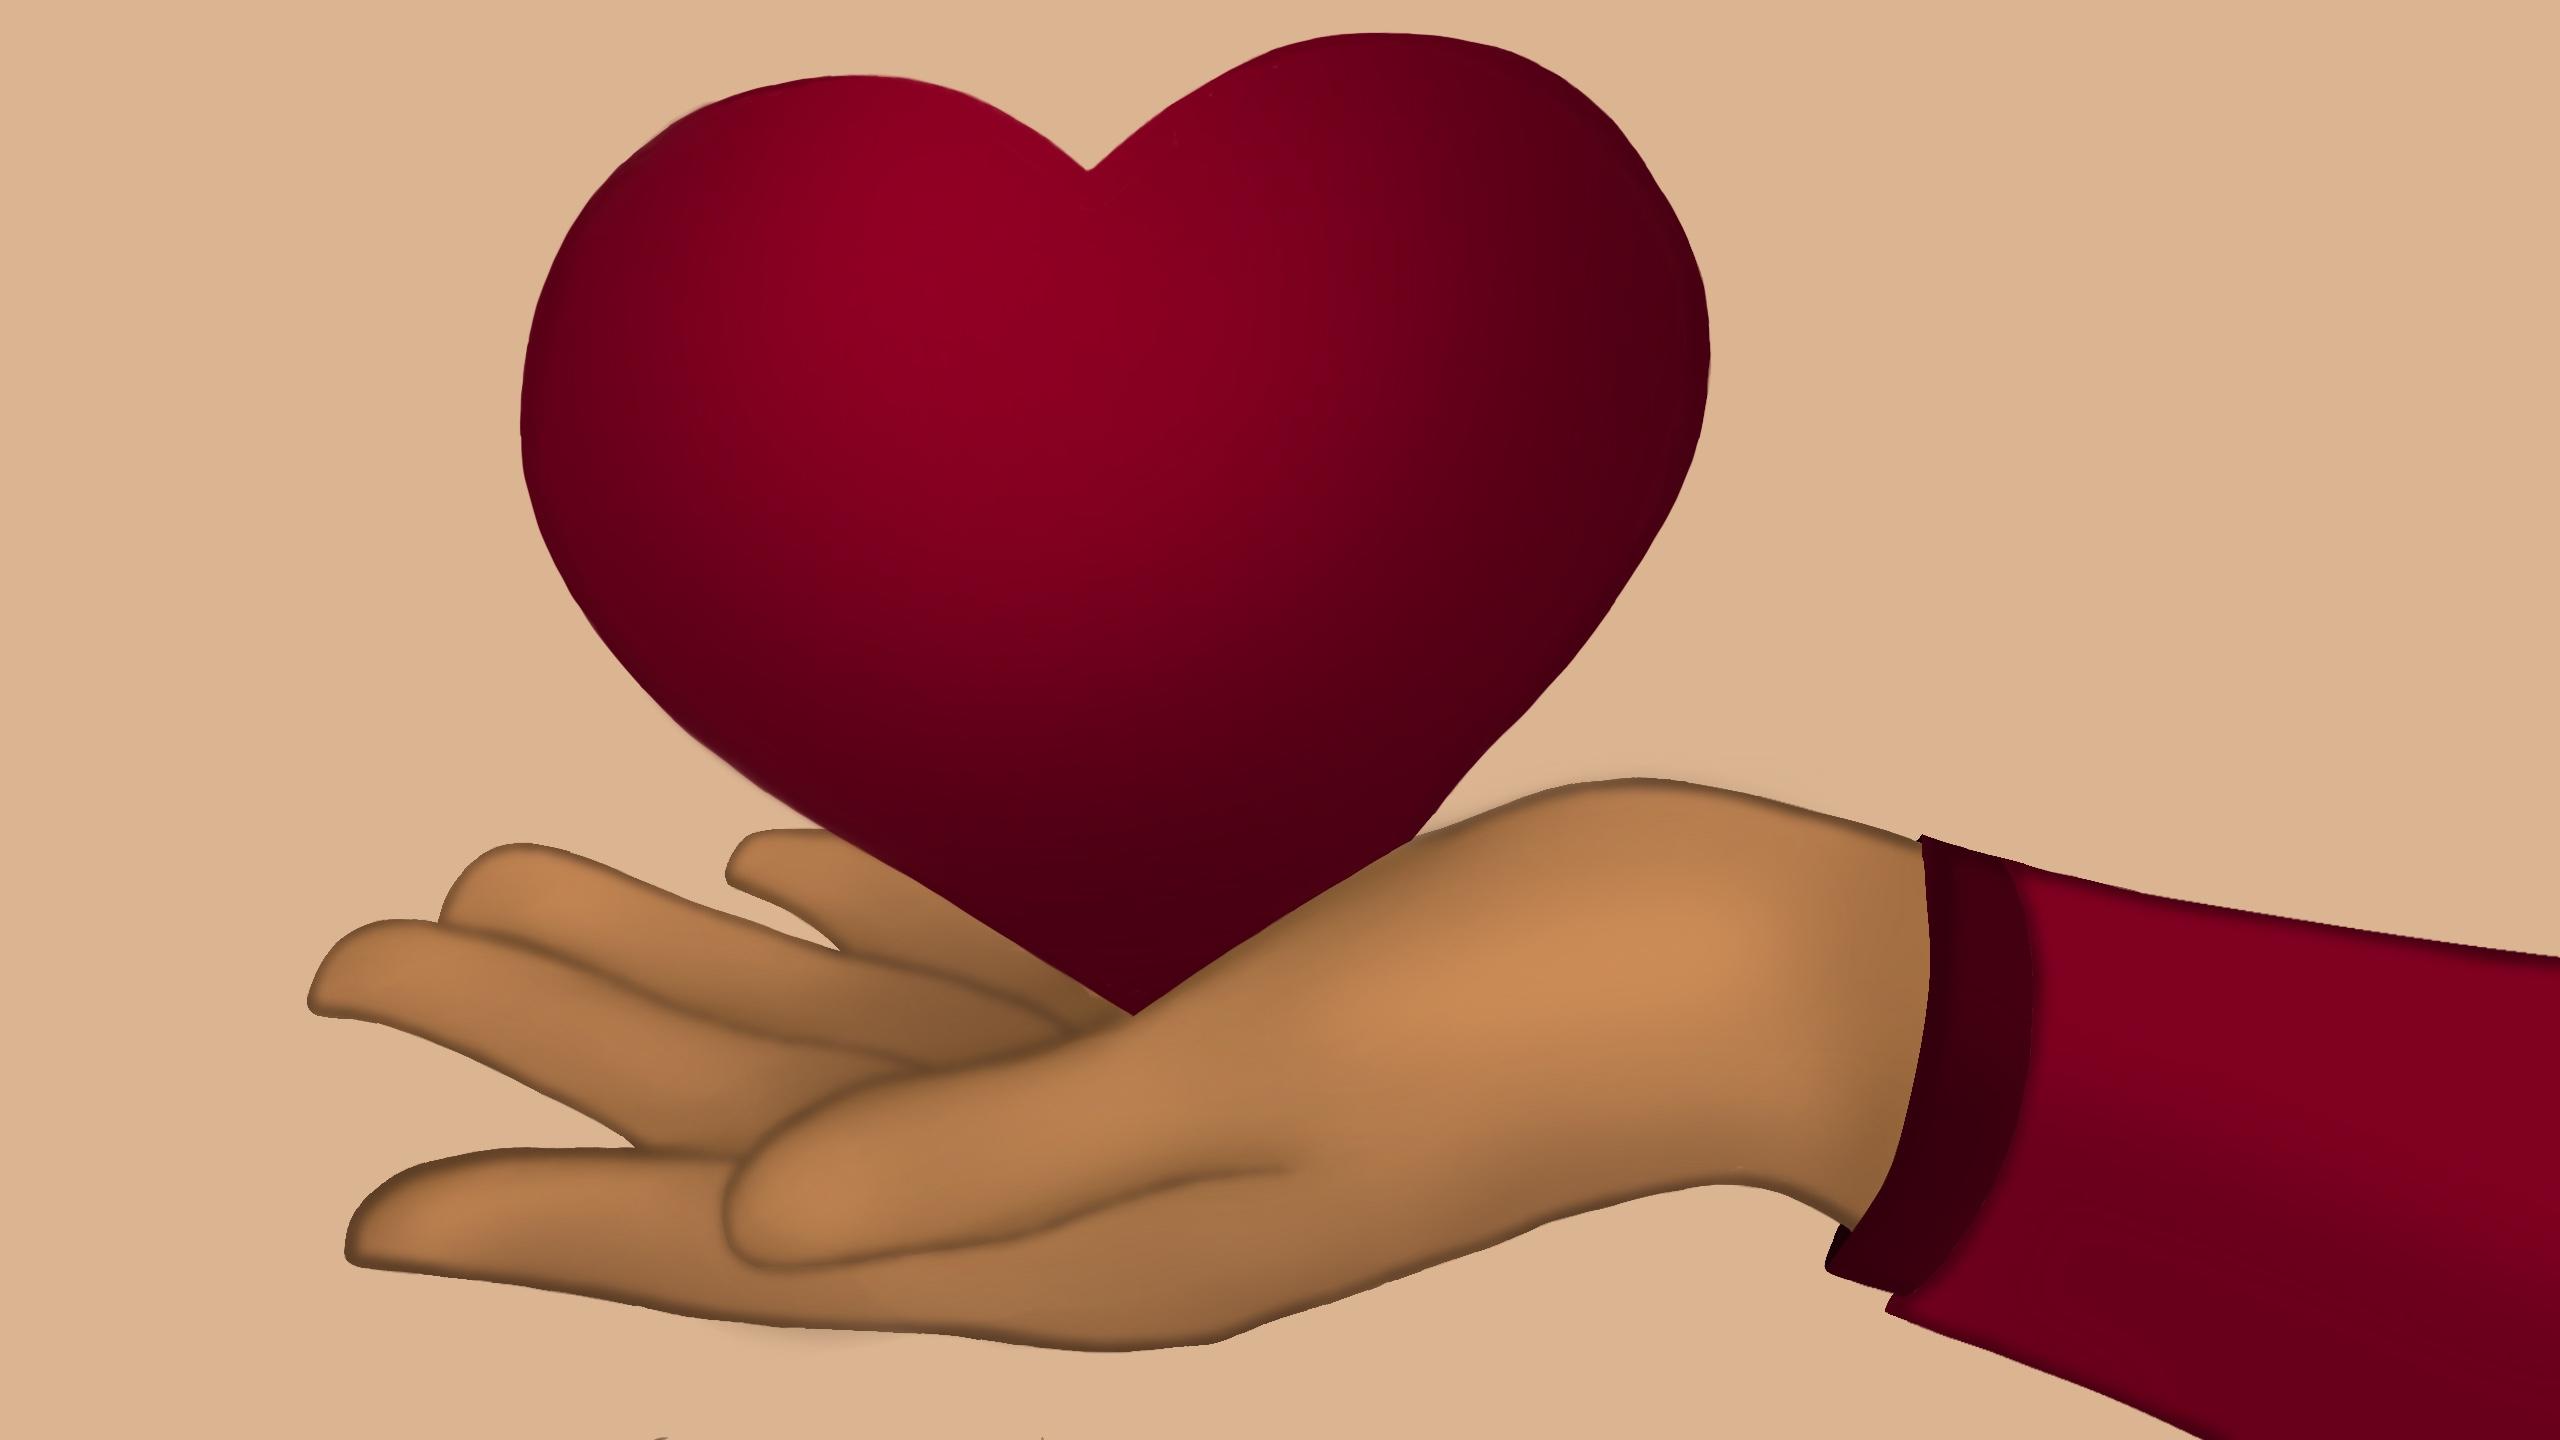 Illustration of a hand reaching out and holding a big heart